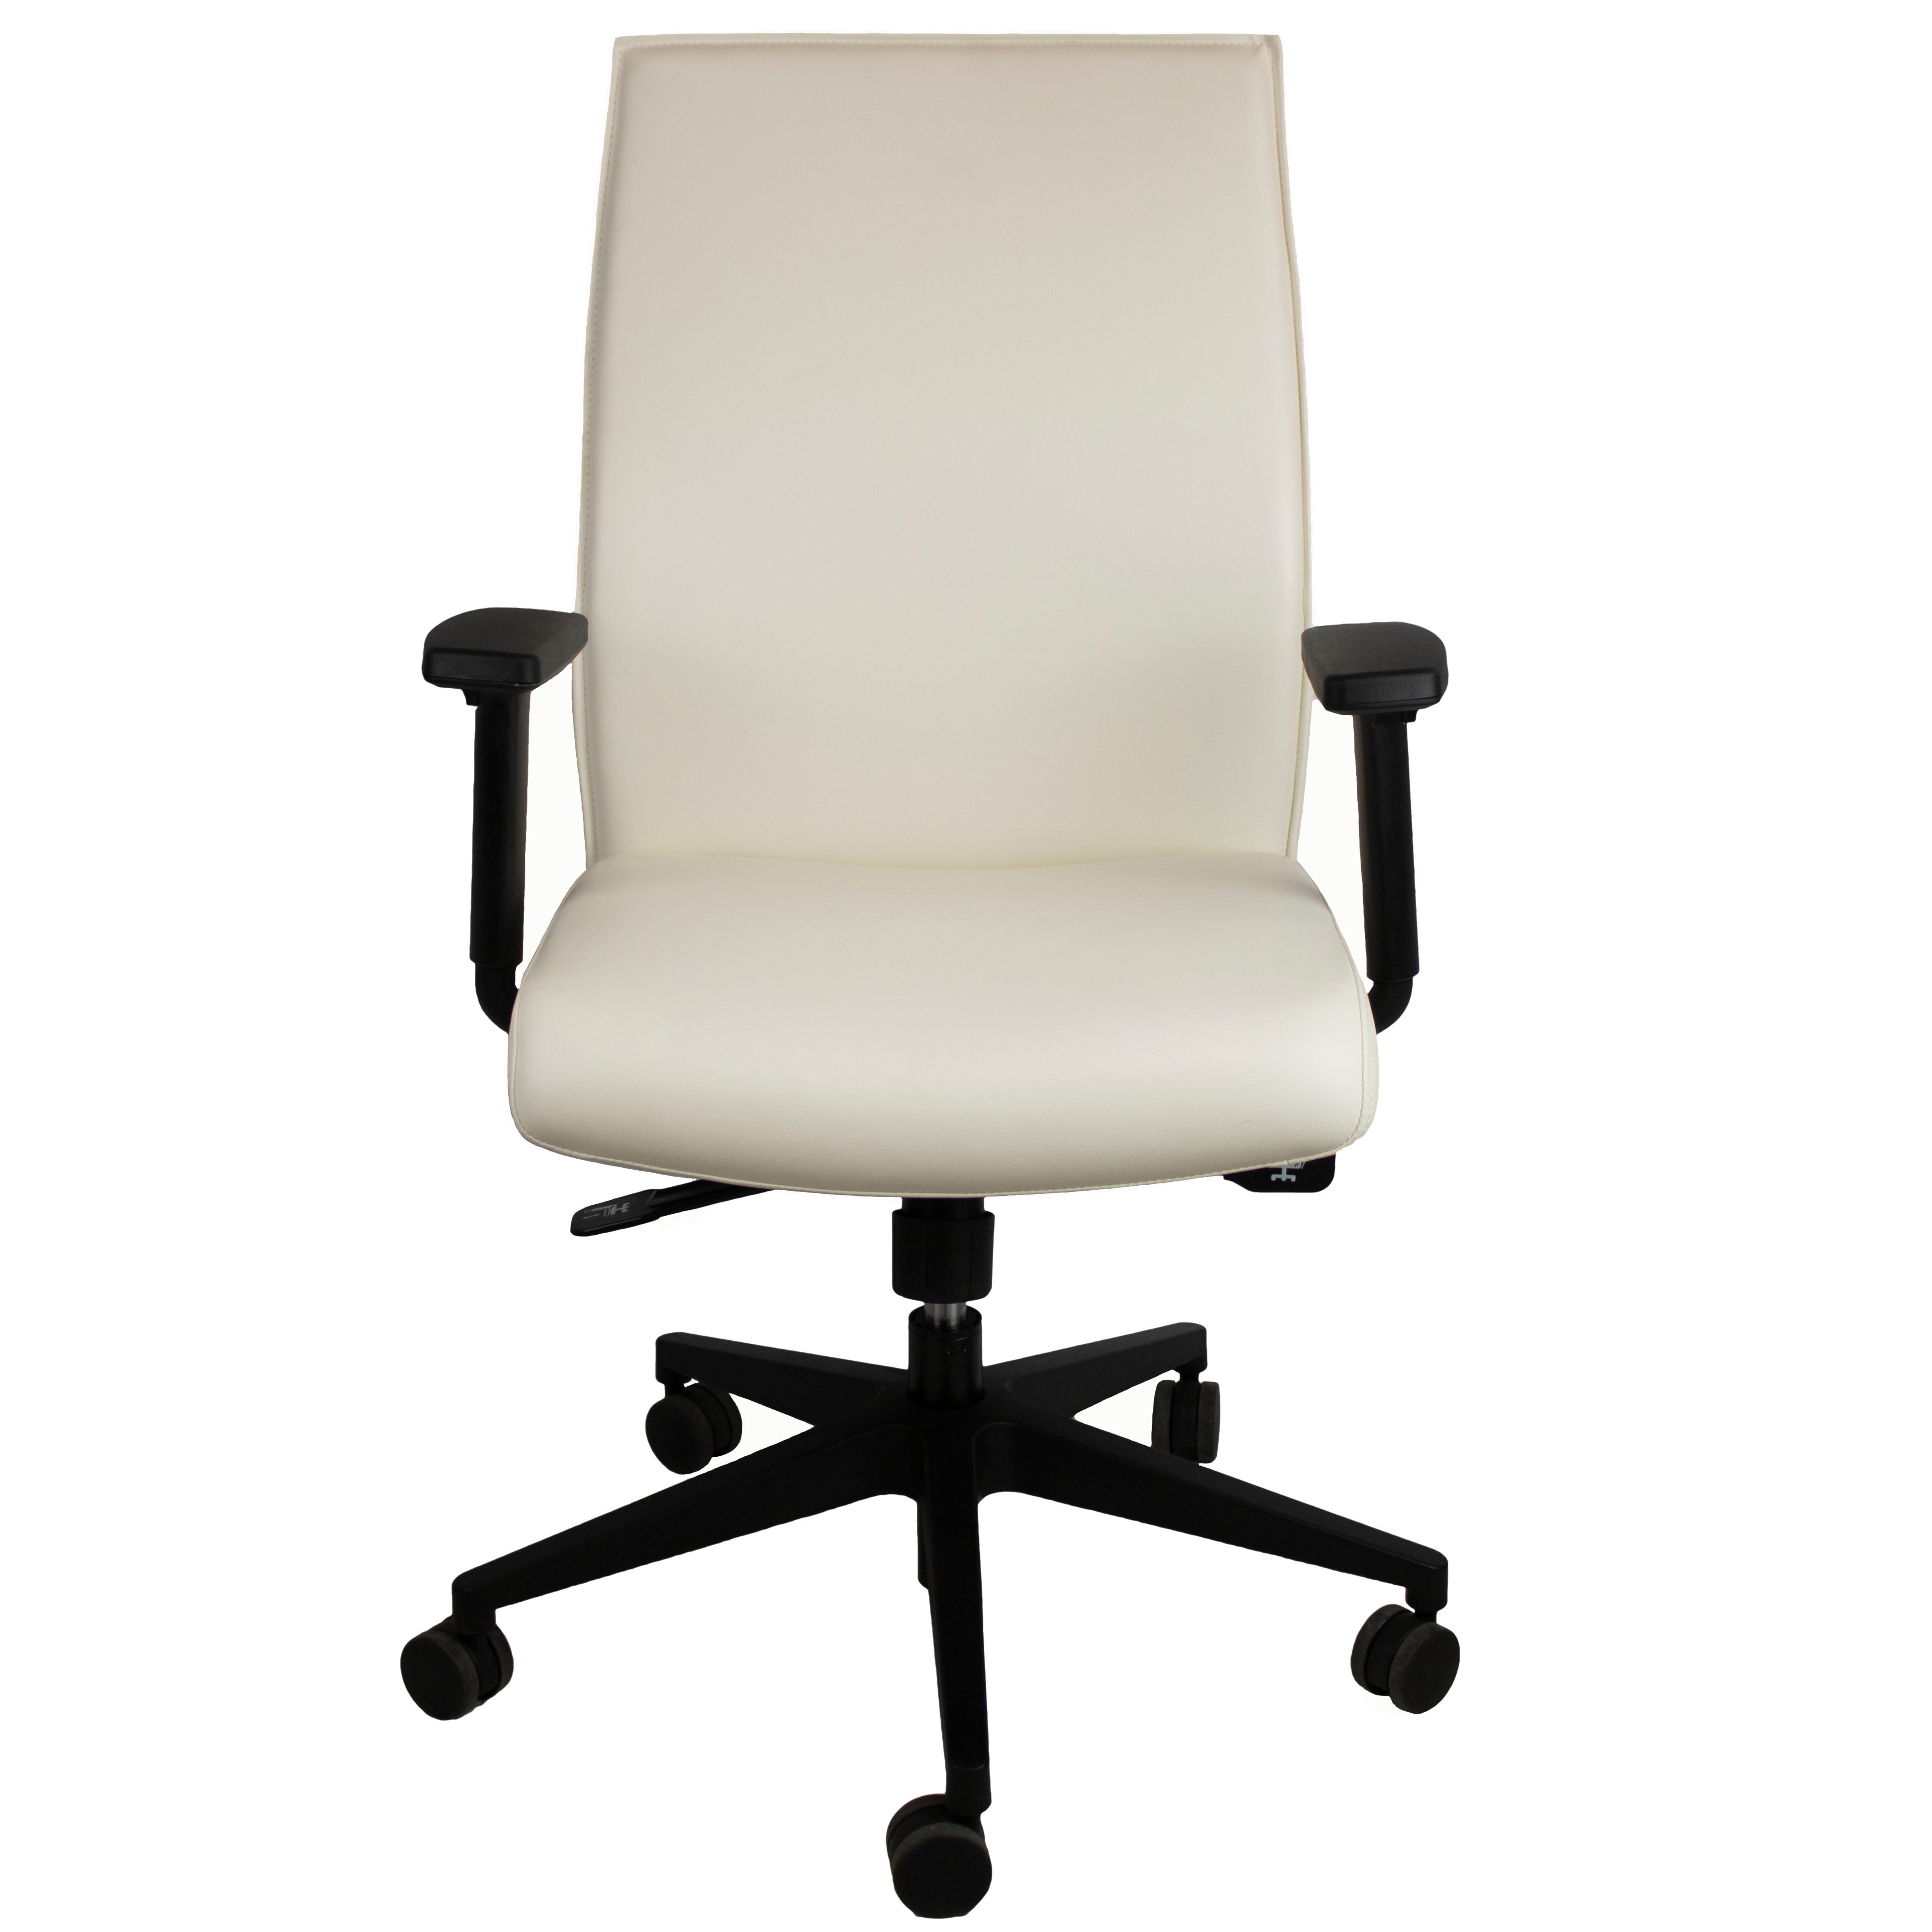 Compel Maxim LT™ Task Chair - Frost - New CLOSEOUT